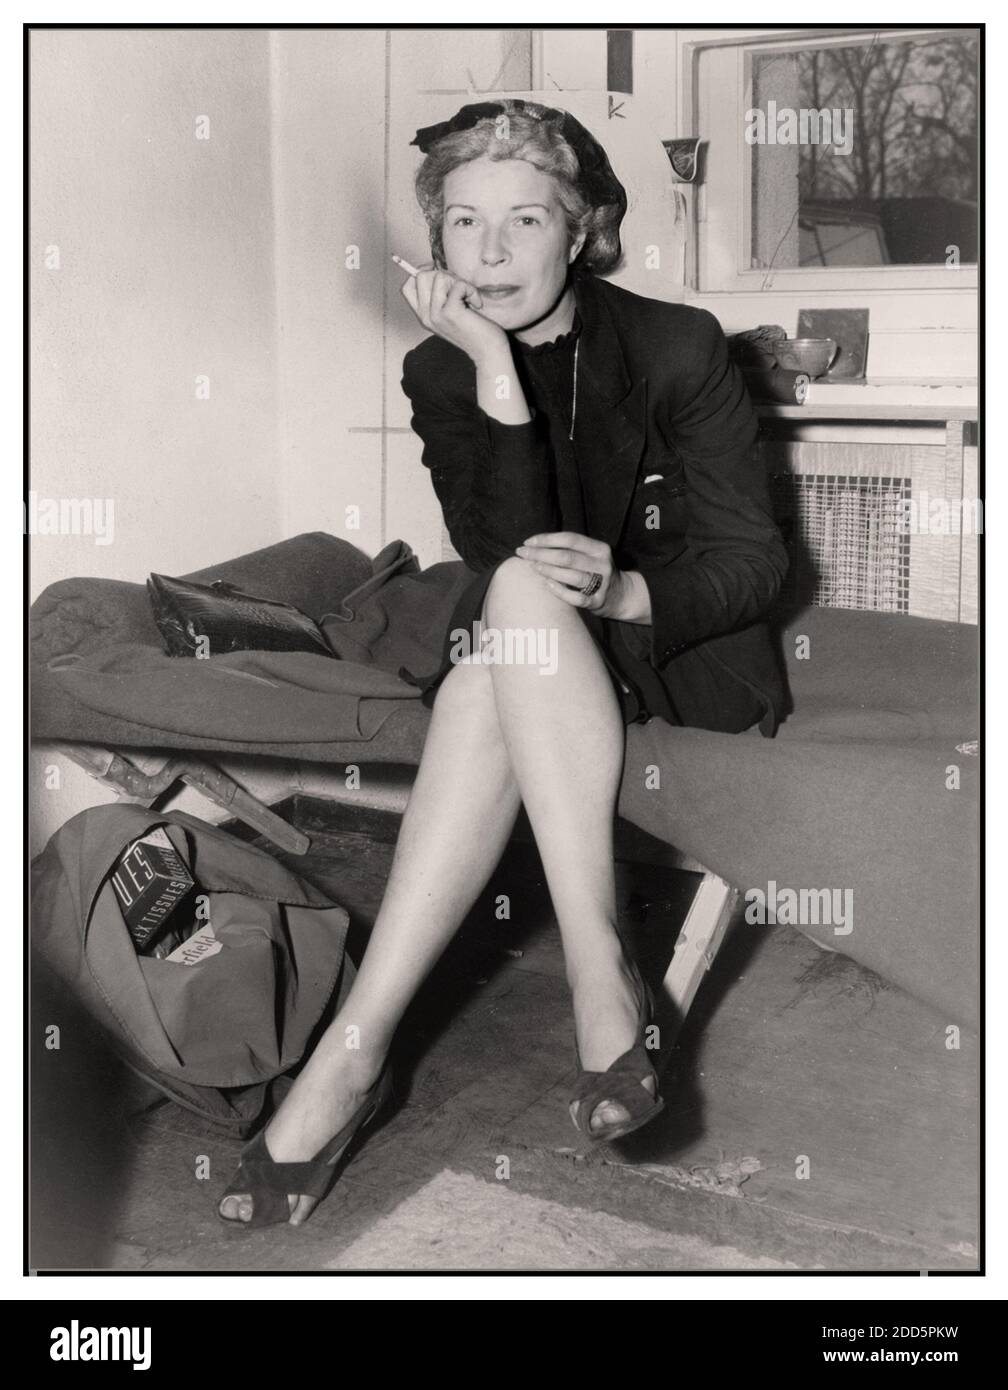 AXIS SALLY Archive WW2 image of Axis Sally / Mildred Gillars a radio broadcaster for Nazi German State Radio during WW2 In American custody she was tried for treason and imprisoned for 10 years Stock Photo